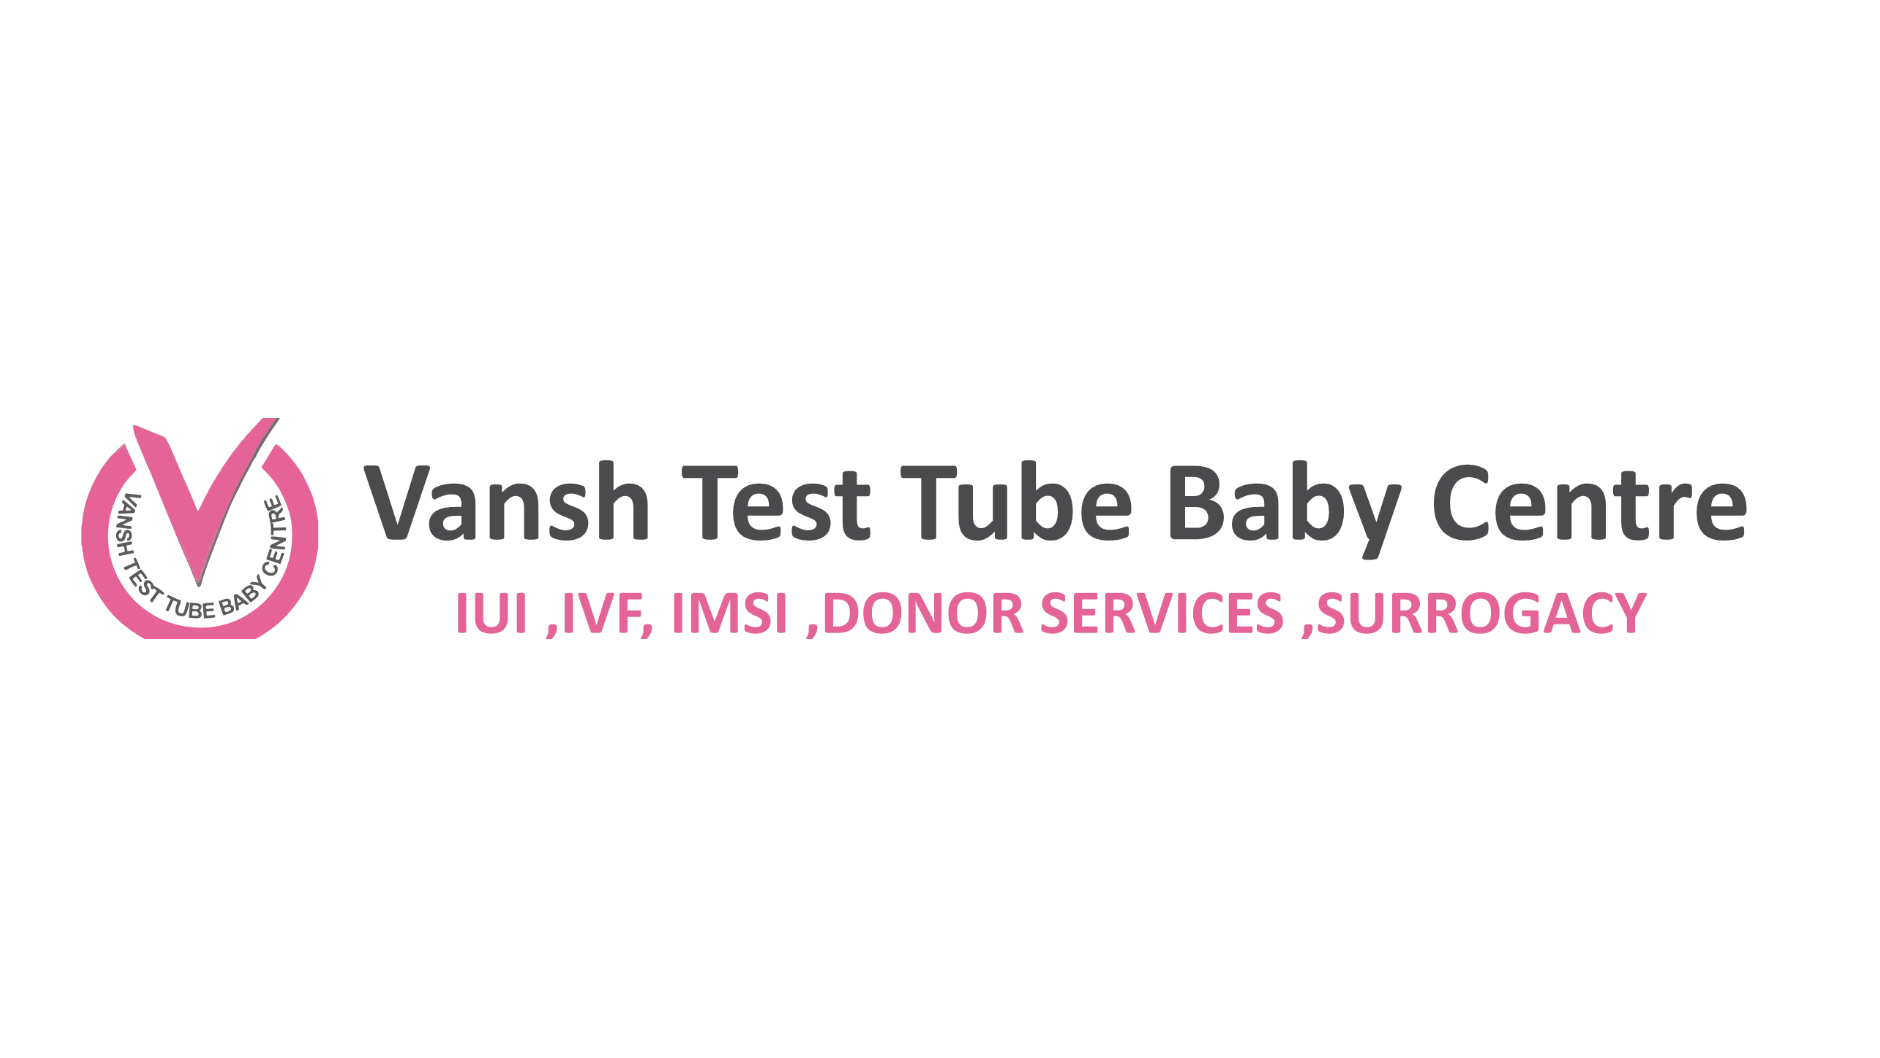 Vansh Test Tube Baby is one of the best IVF centres in Patna.